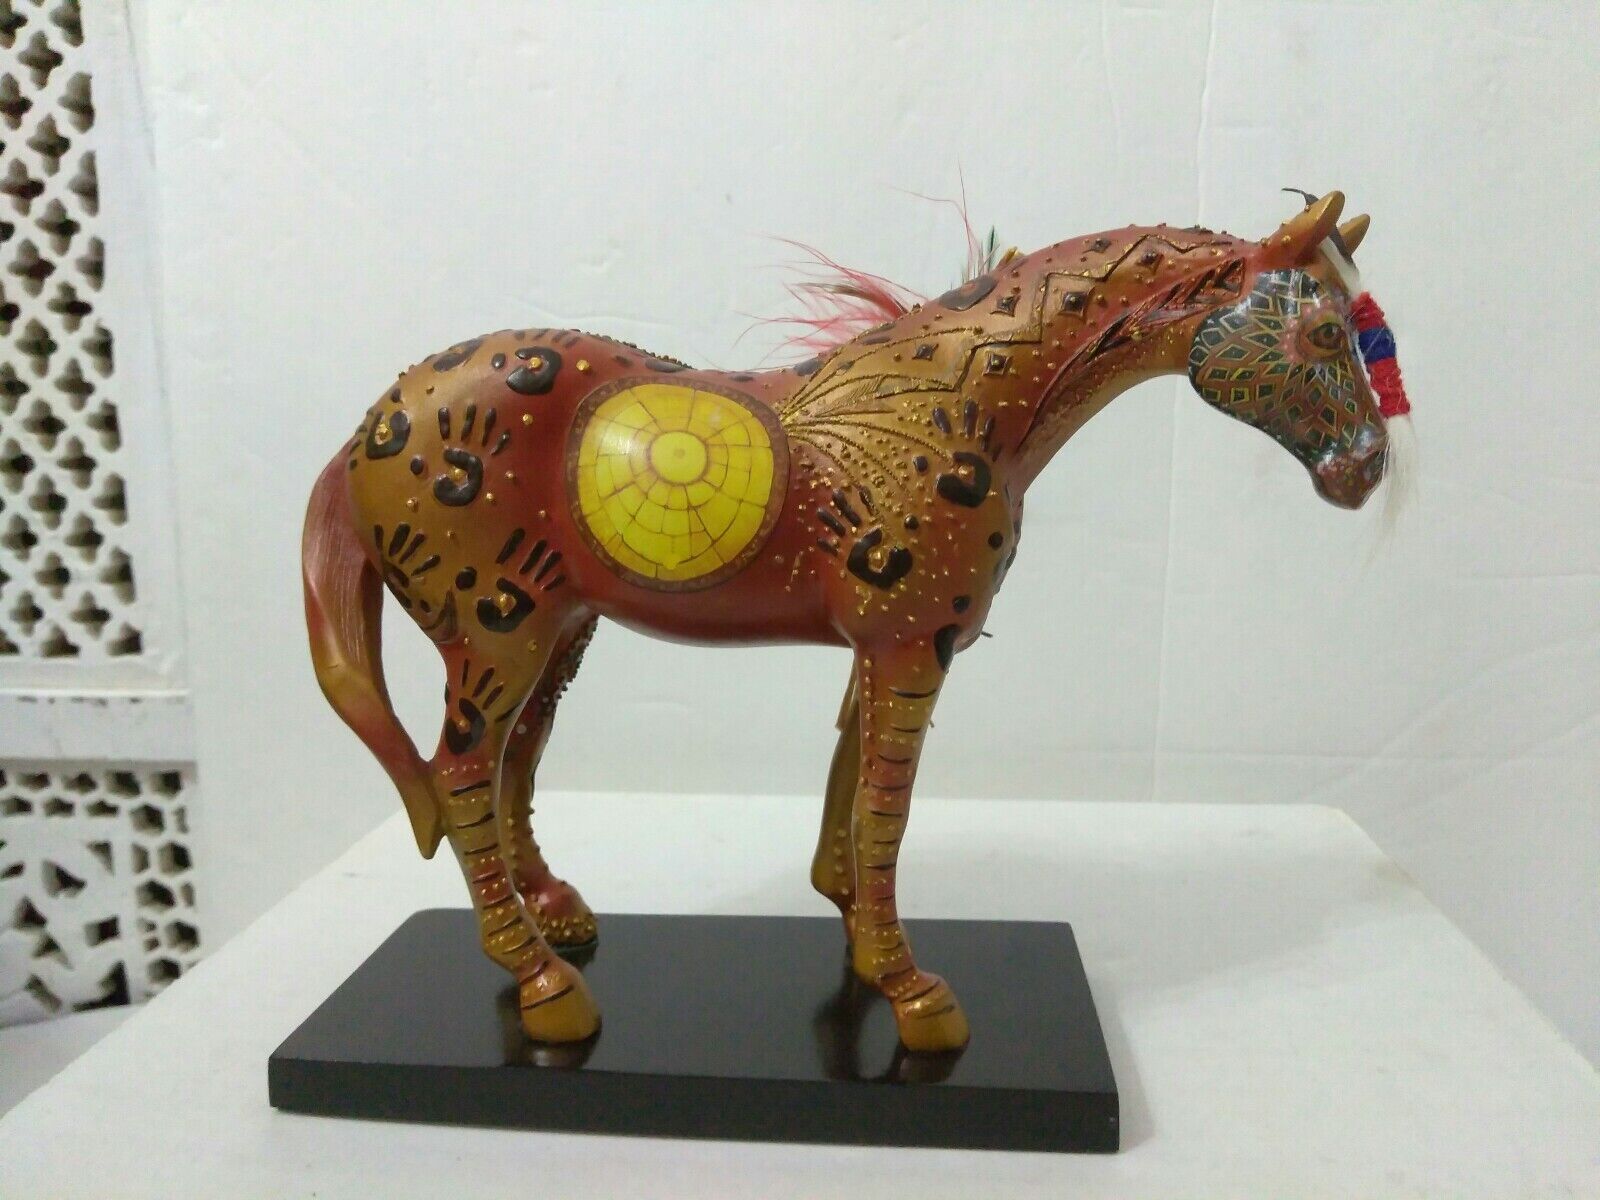 WESTLAND GIFTWARE THE TRAIL OF PAINTED PONIES REUNION OF THE FAMILY OF MAN 12208